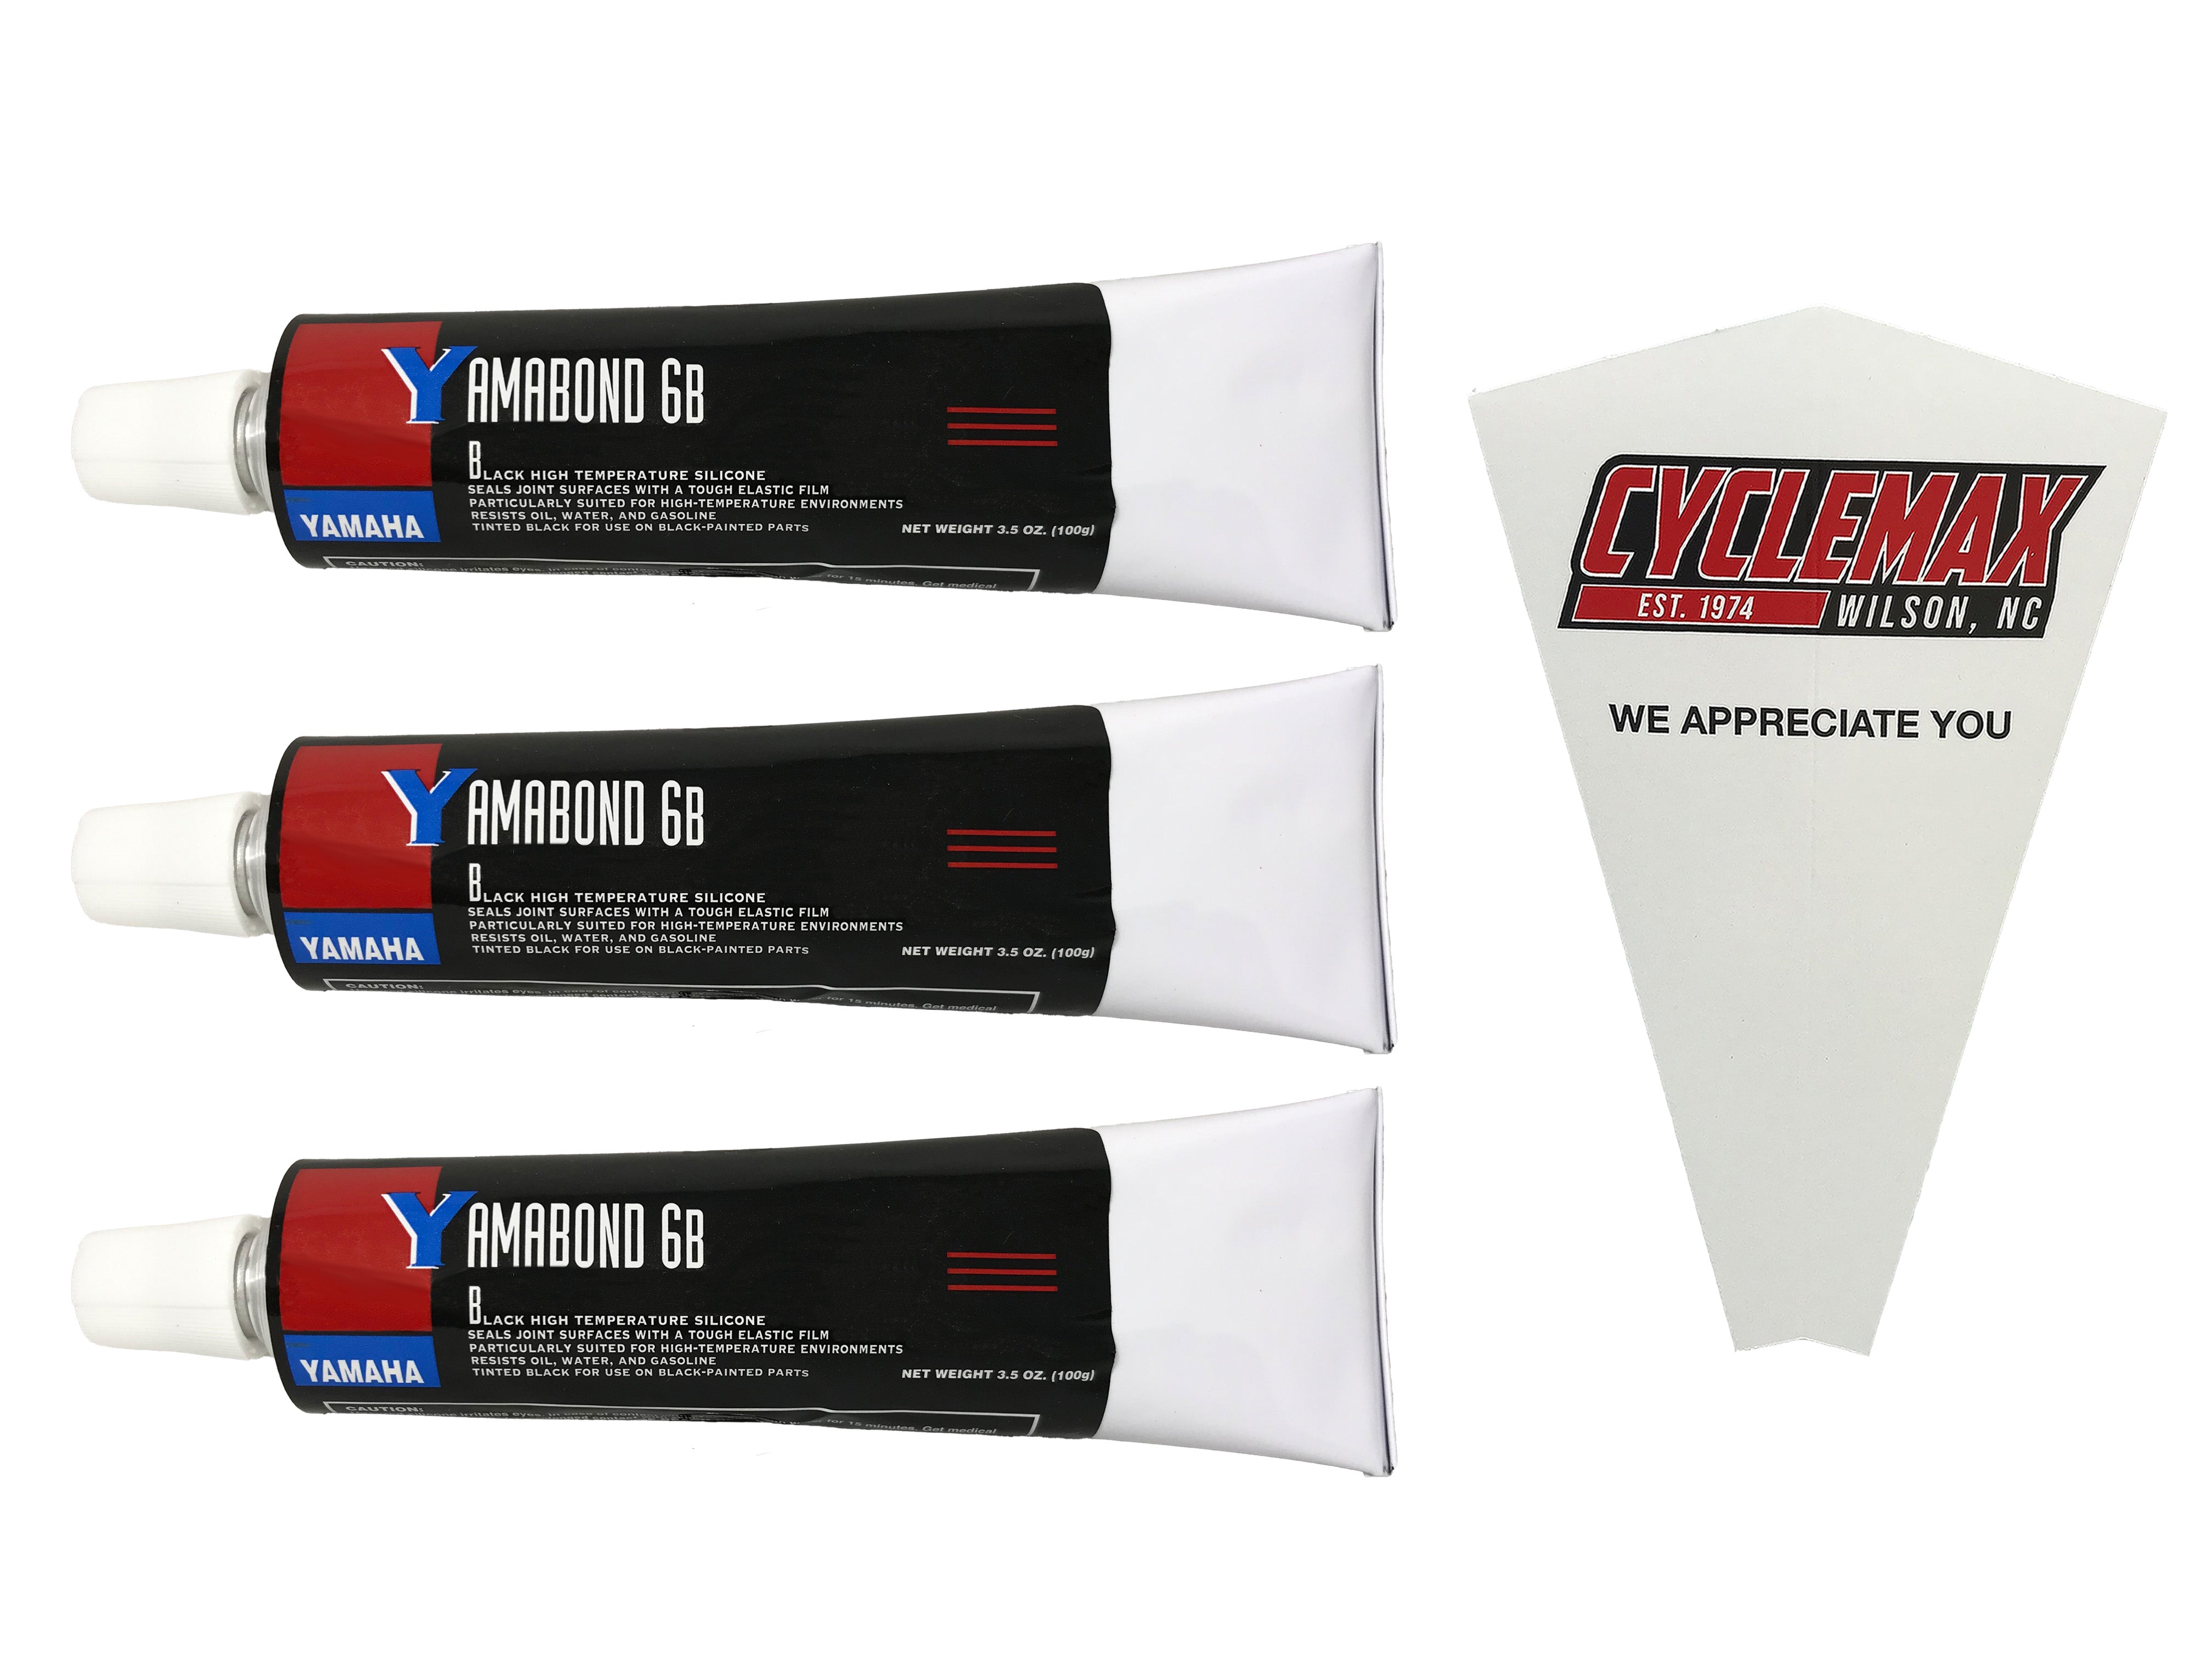 Cyclemax Three Pack for Yamaha Yamabond High Temperature Silicone ACC-YAMAB-ND-6B Contains Three 3.5oz Tubes and a Funnel